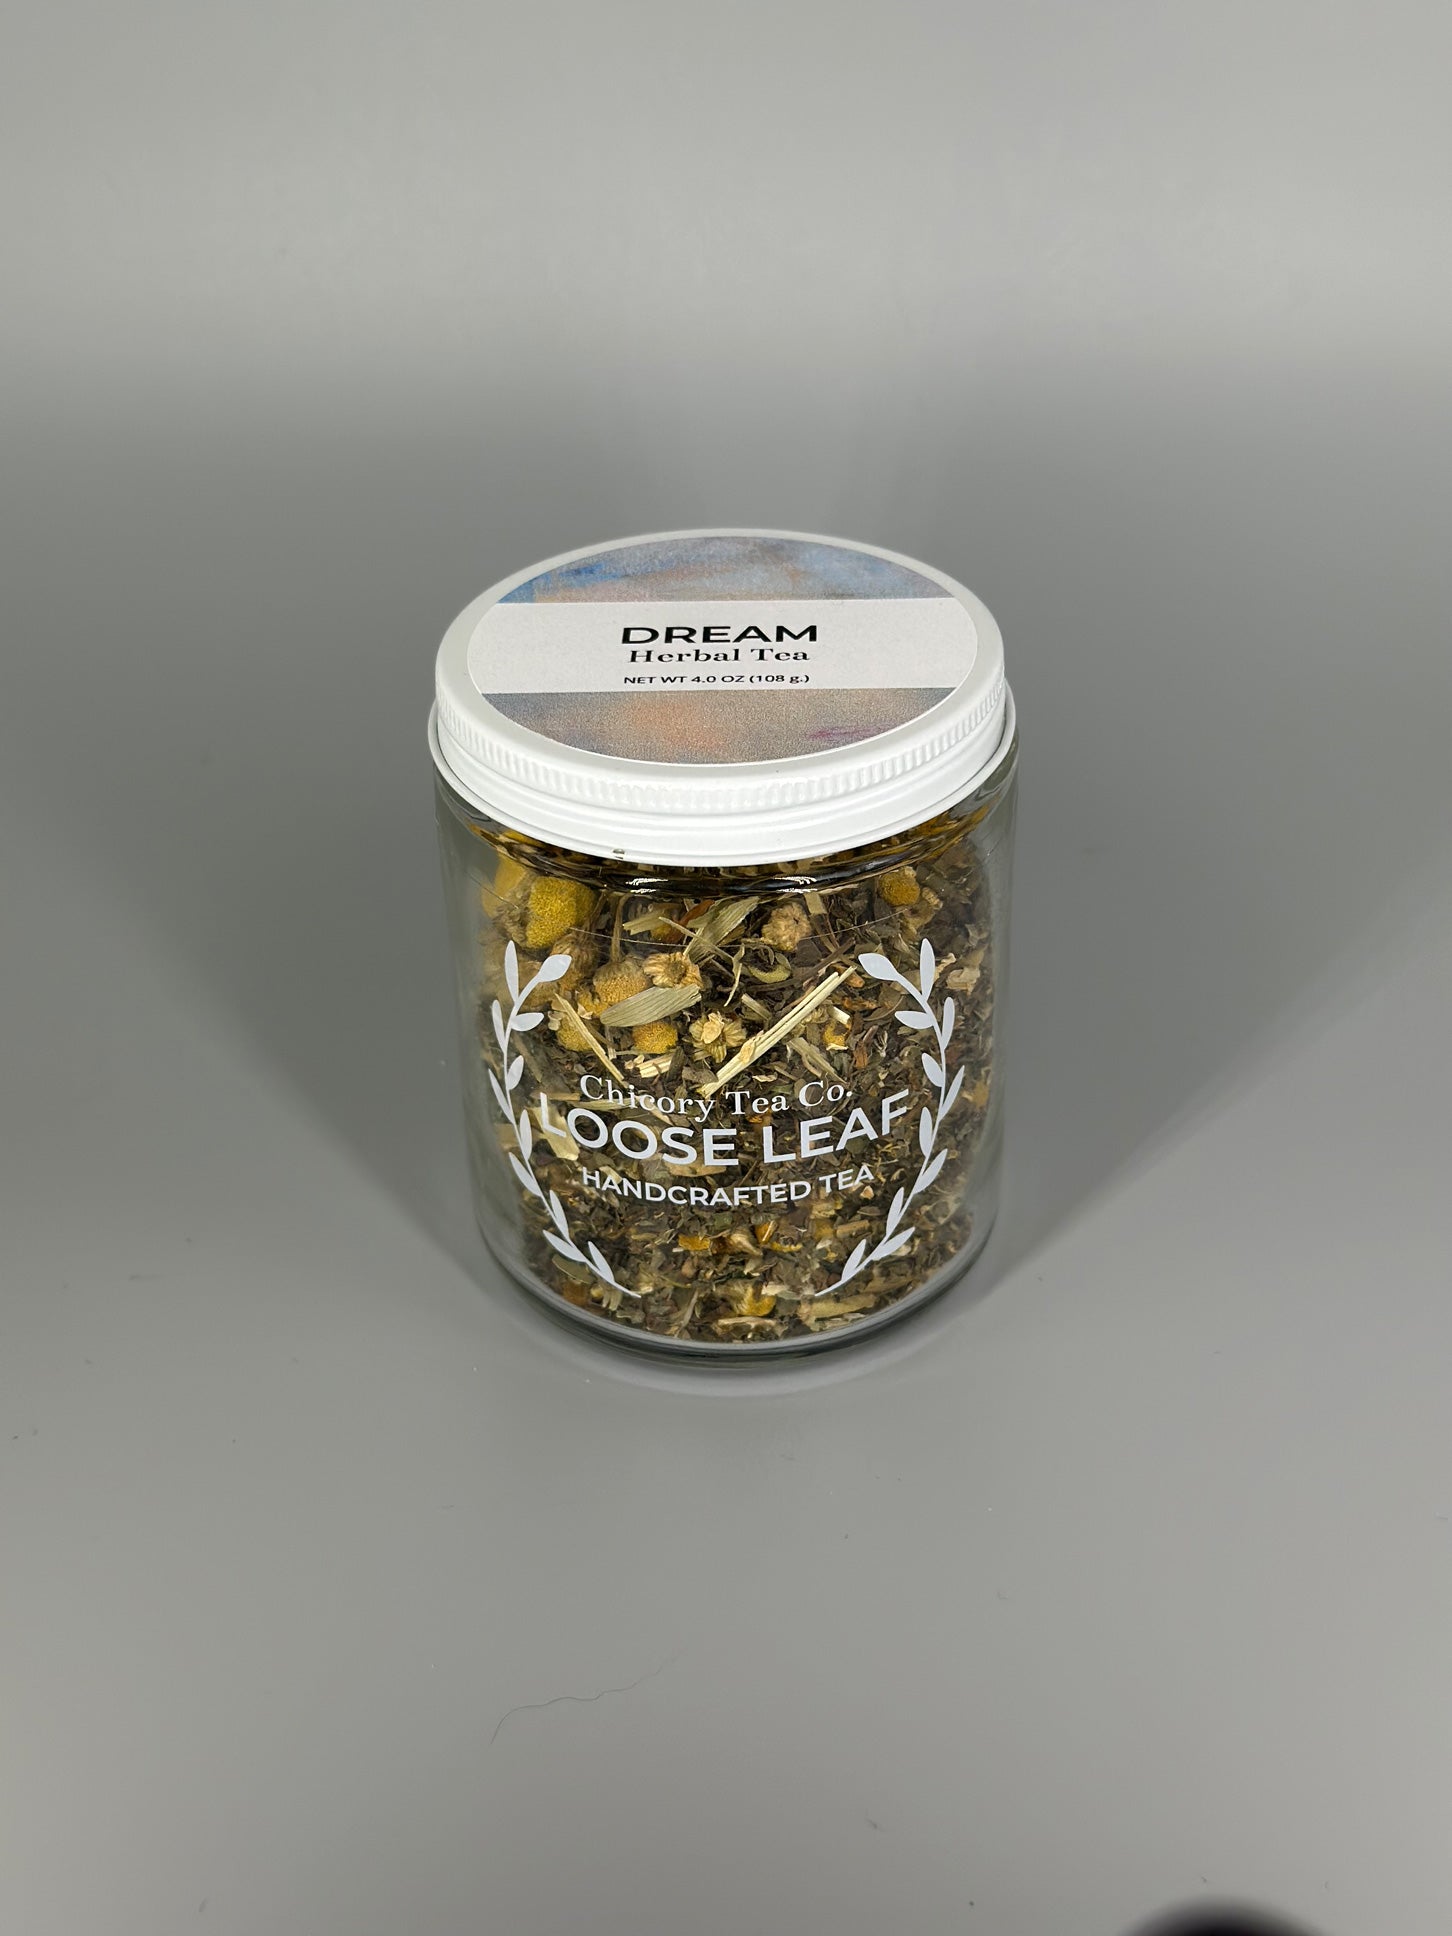 Chicory Tea Co.'s Dream Herbal Tea in the jar, view from the front